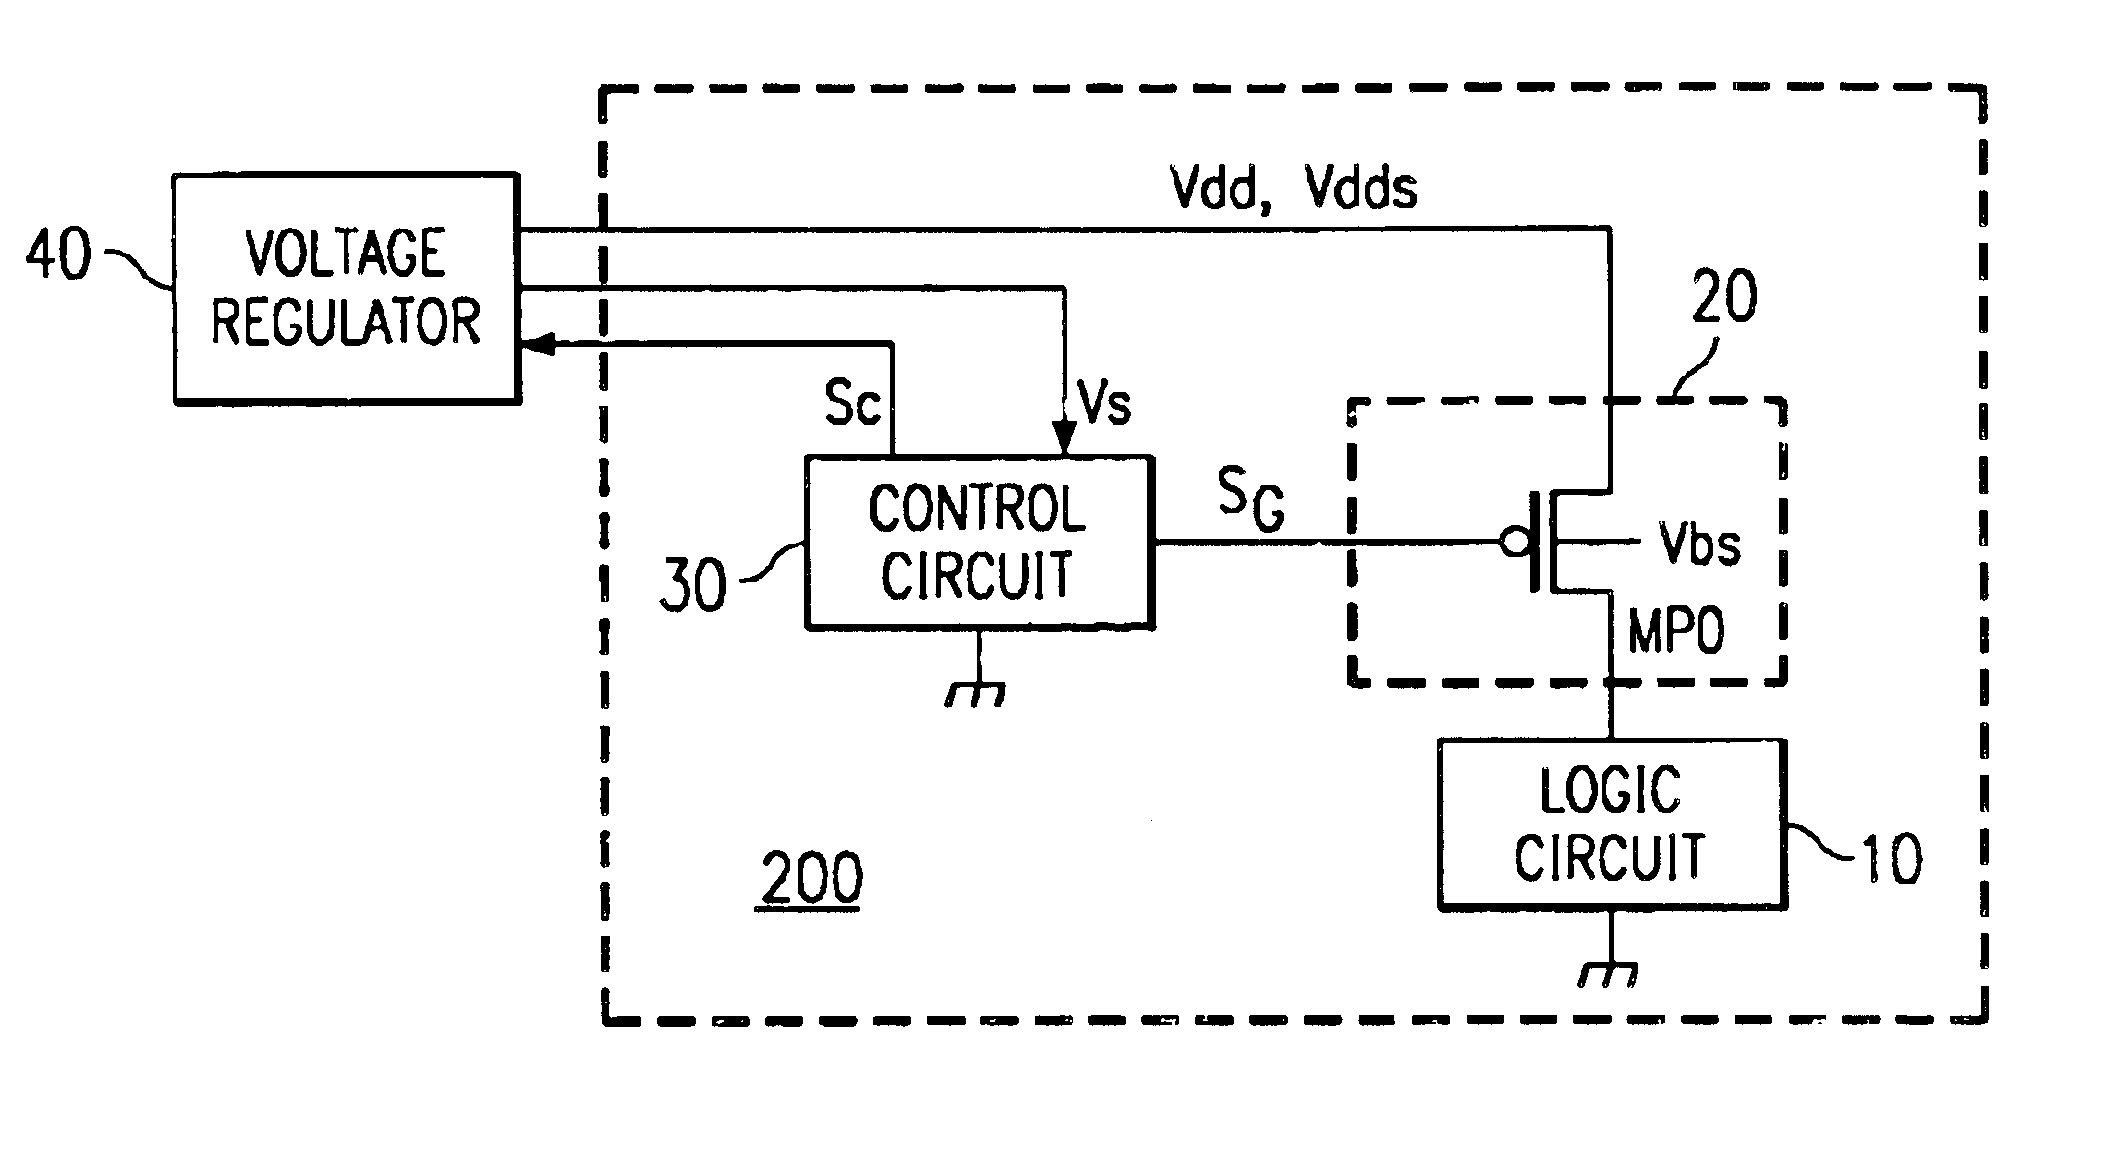 Suppressing the leakage current in an integrated circuit